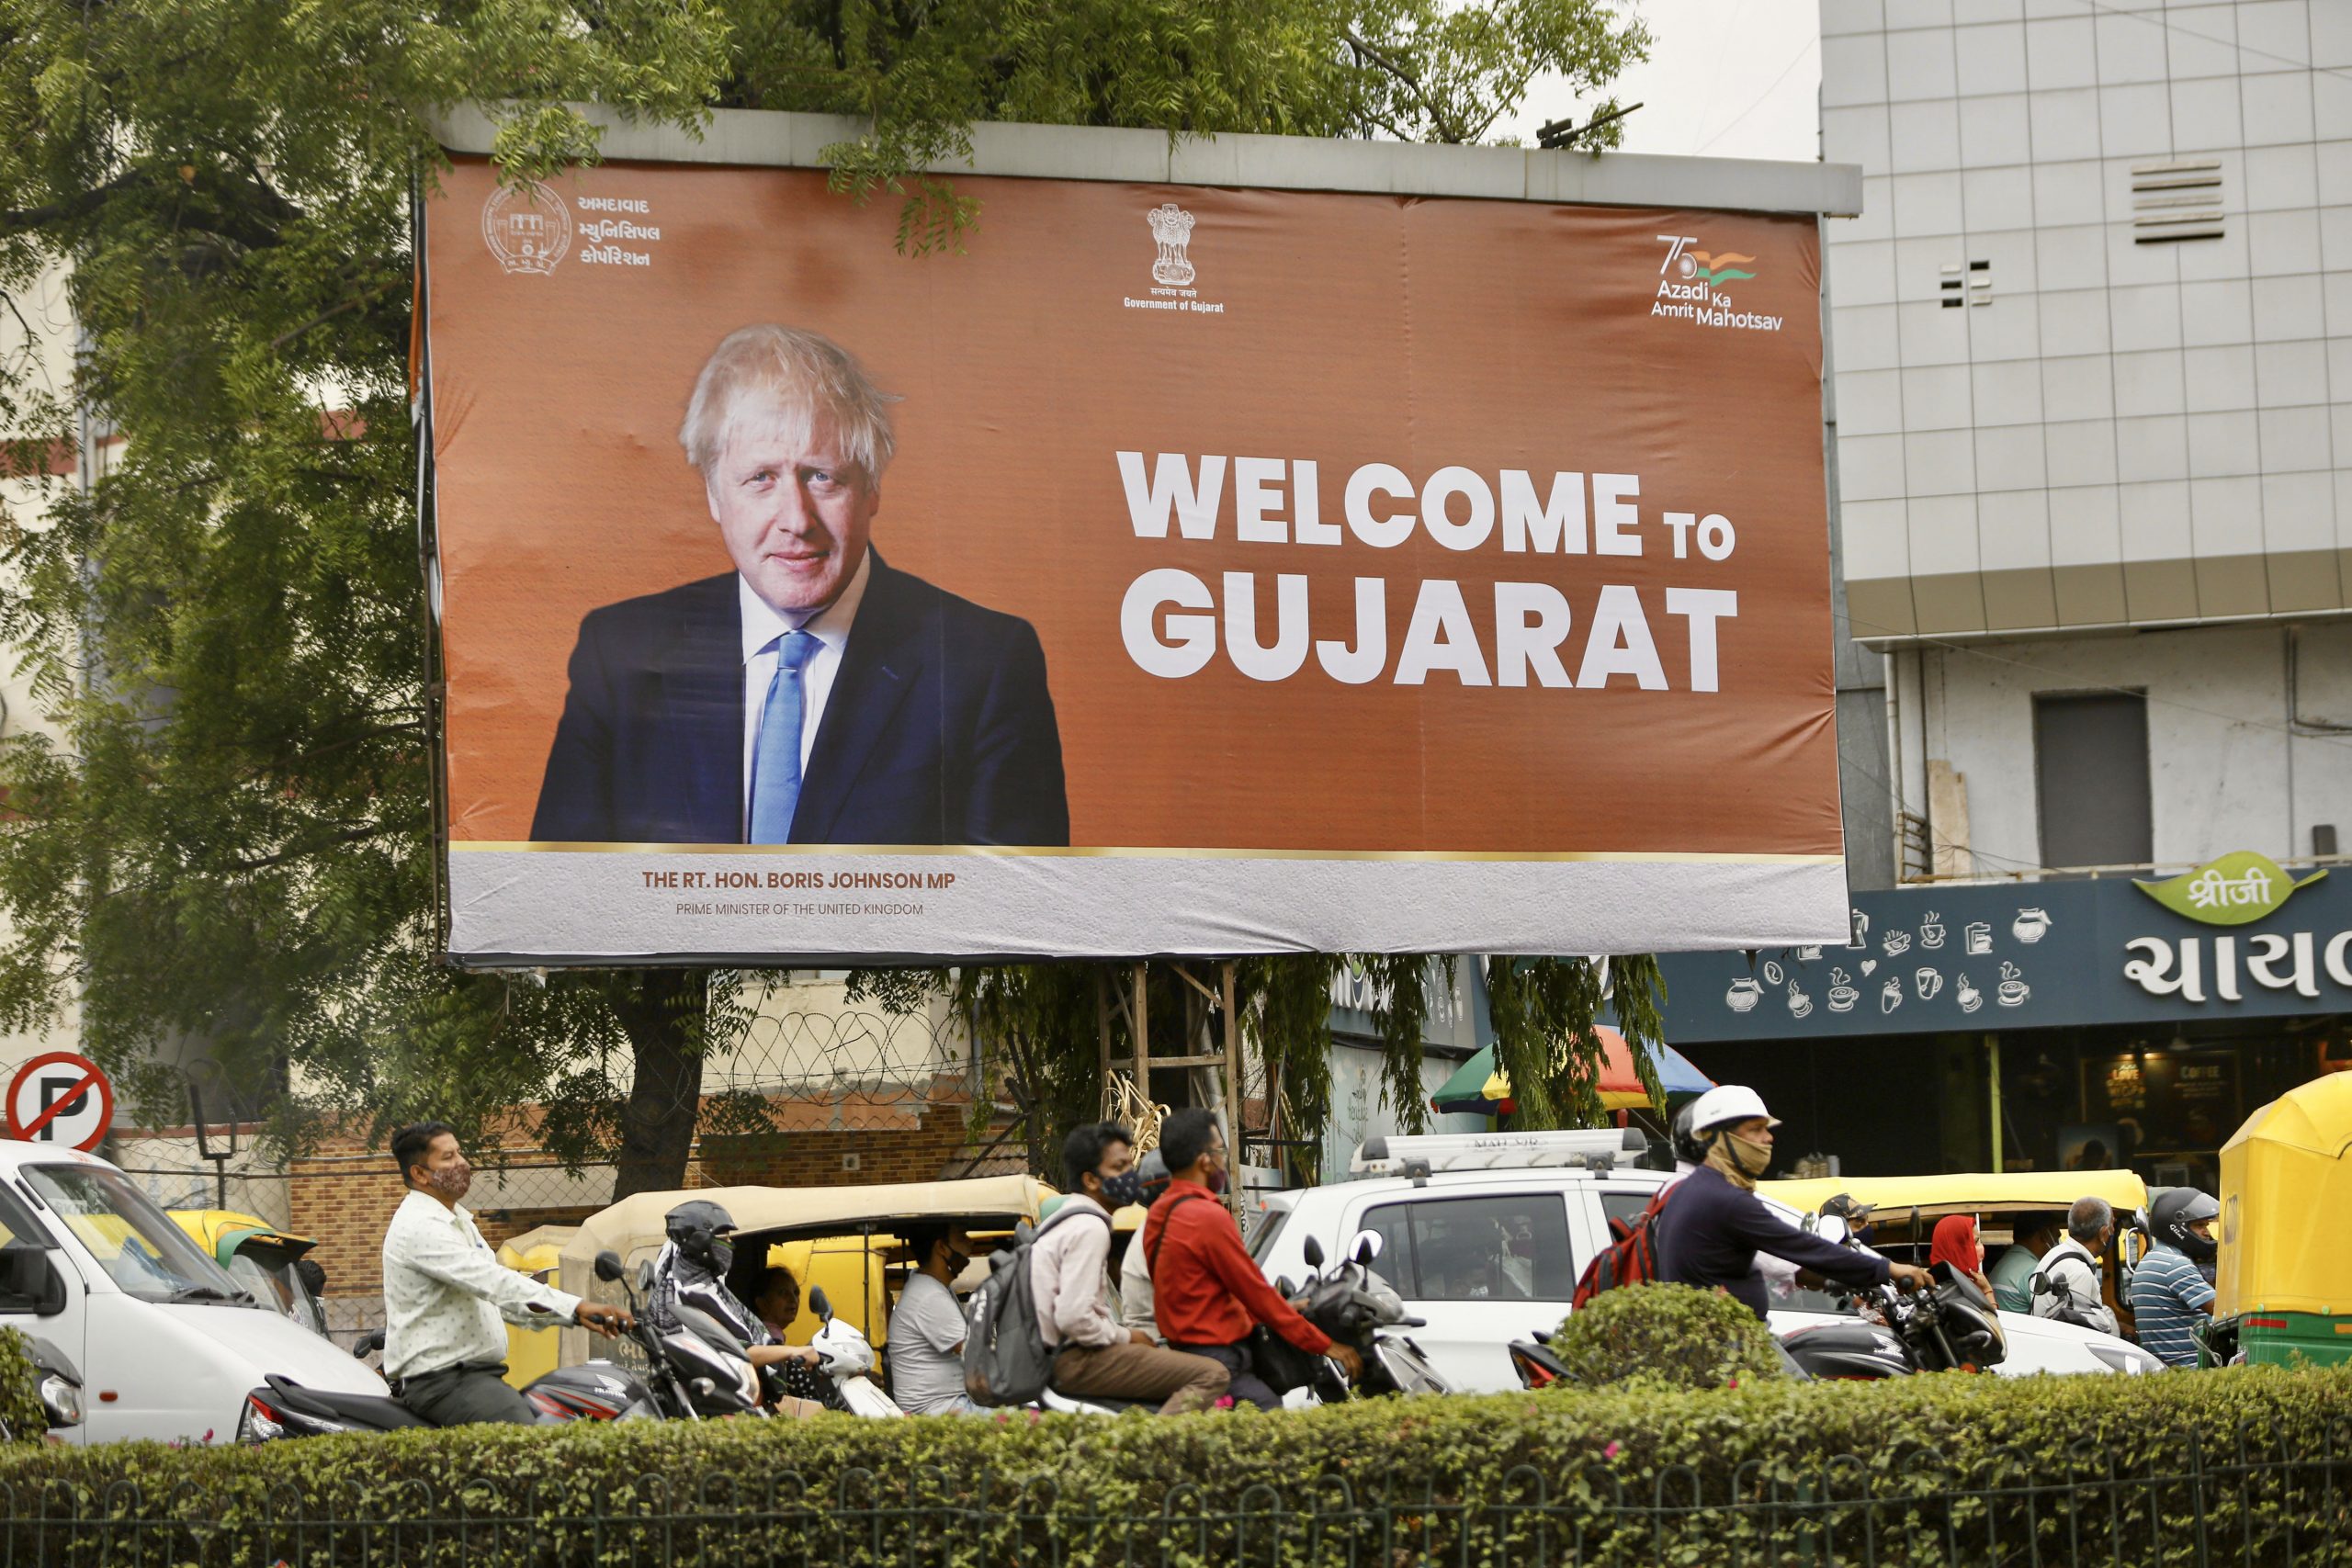 Explained: Why is PM Narendra Modi inviting world leaders to Gujarat?